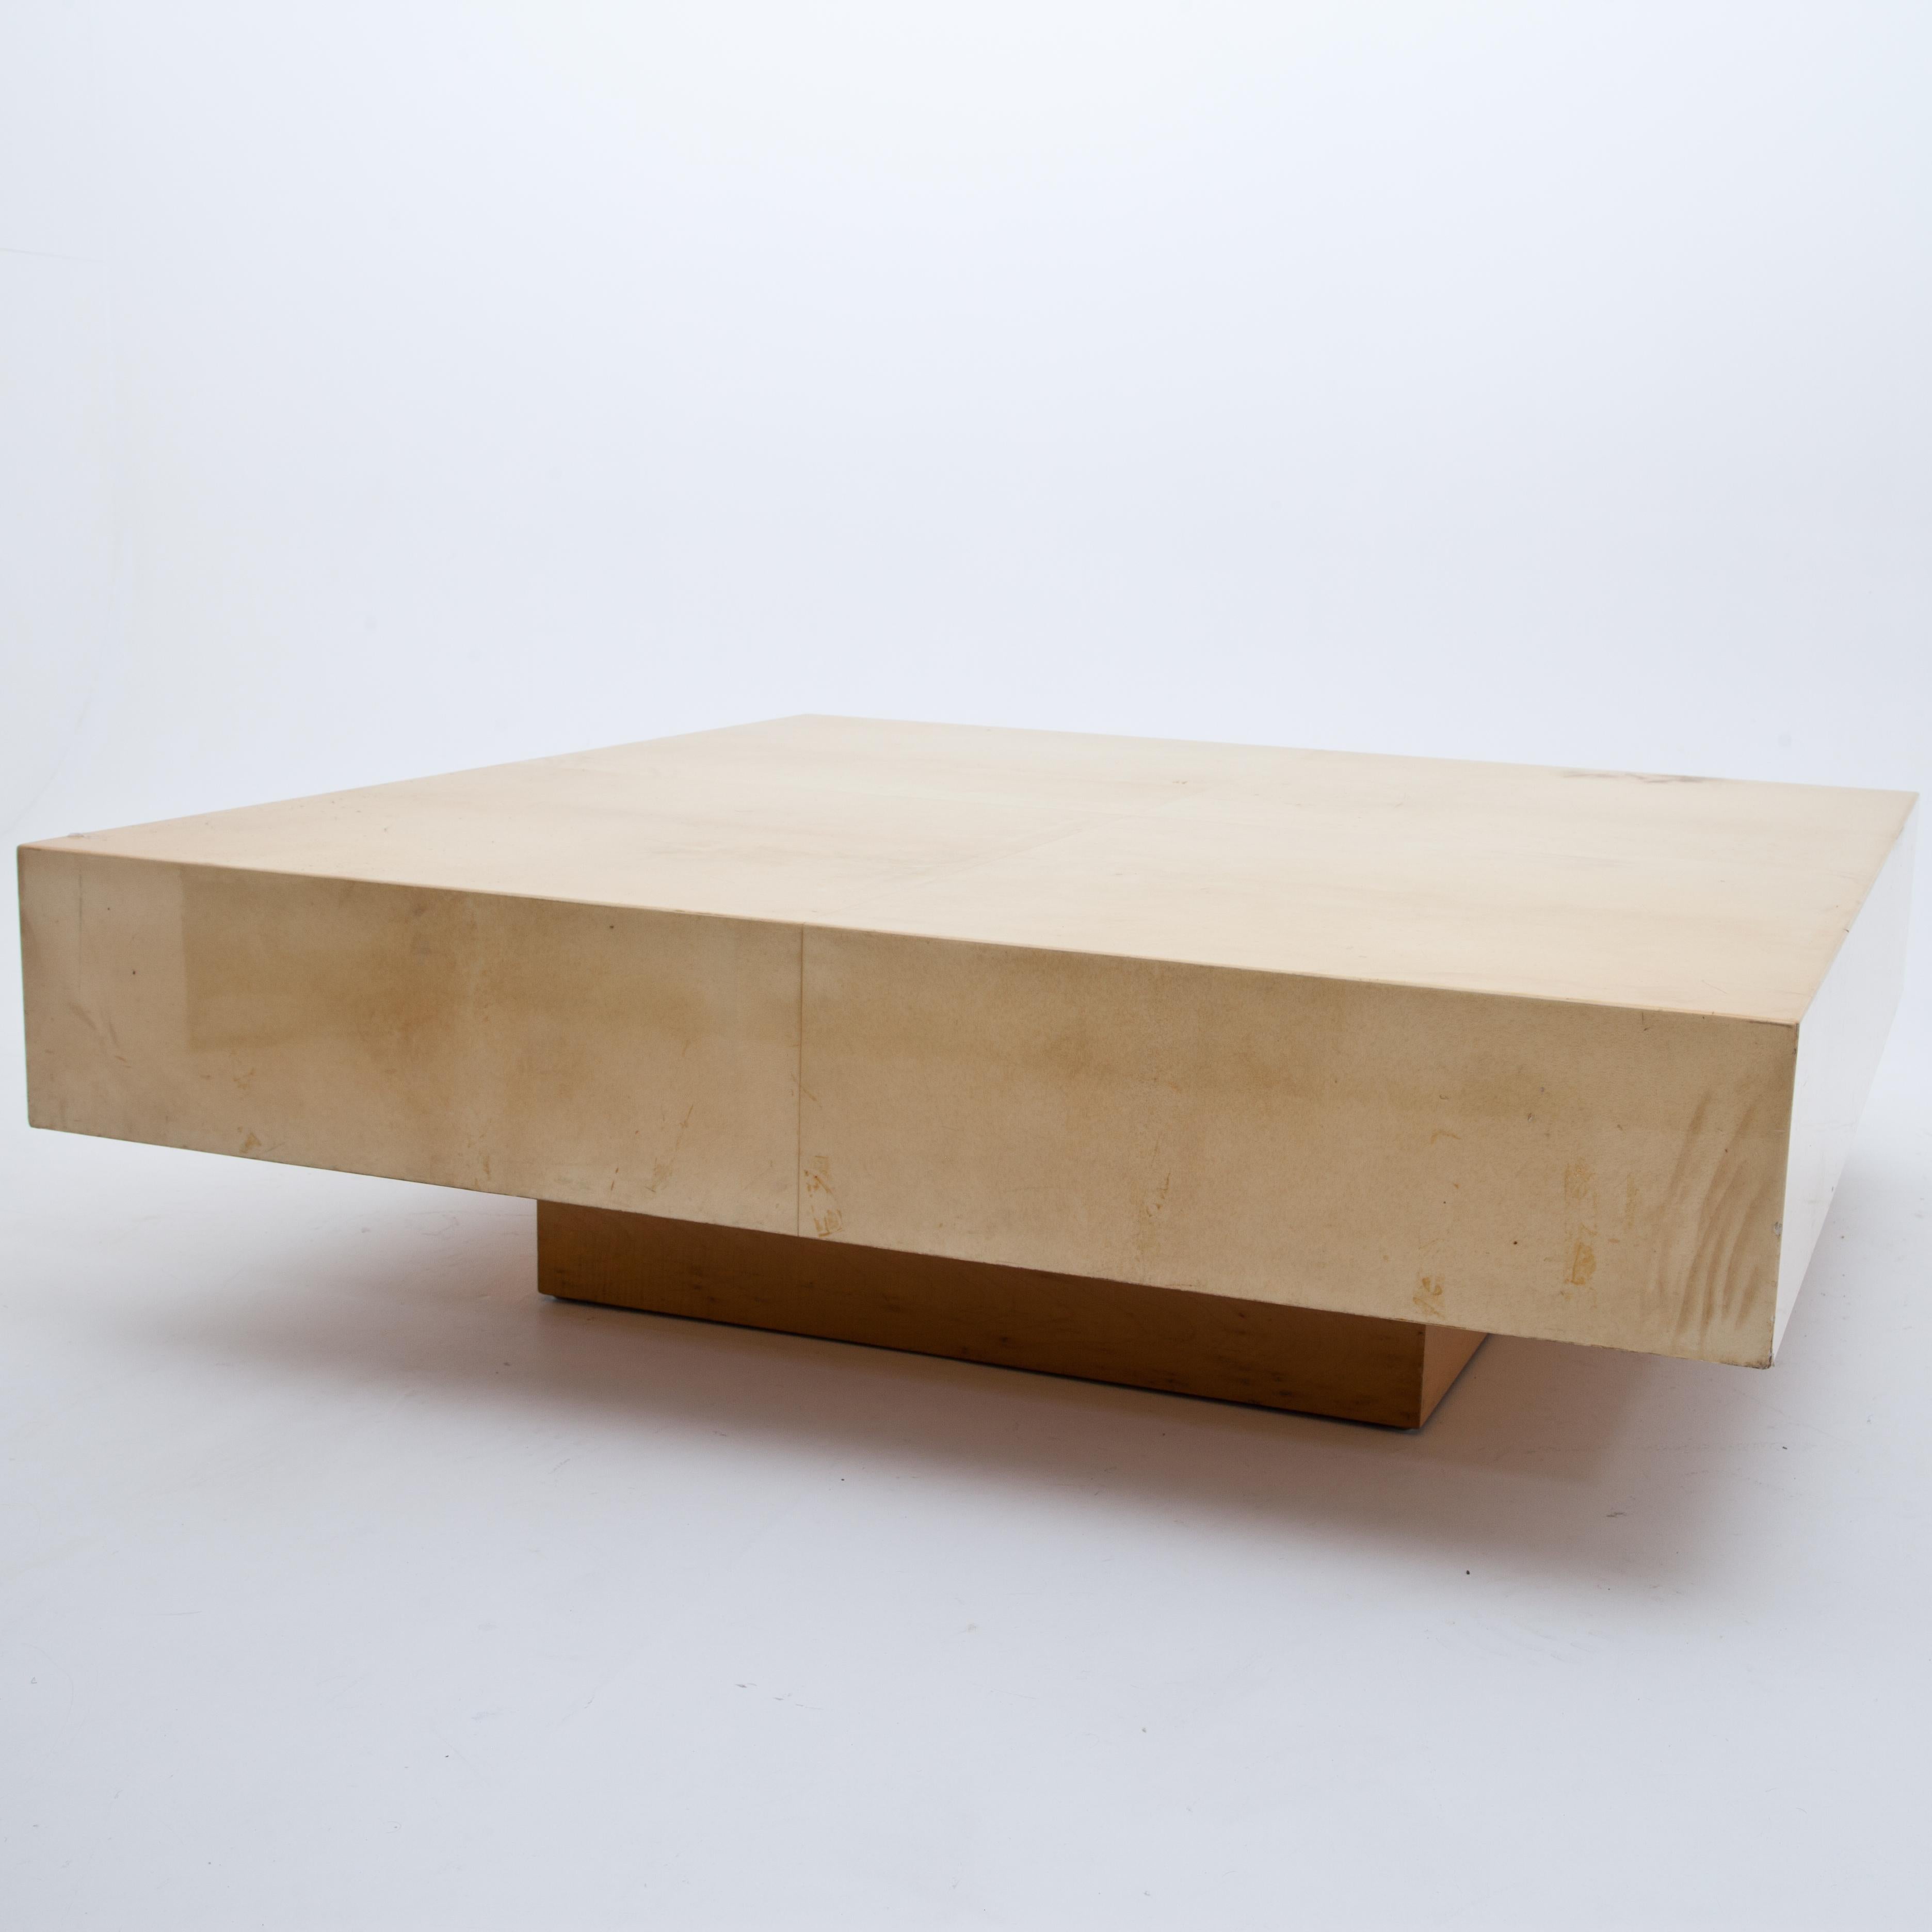 Square coffee table by Aldo Tura on a likewise square stand. The coffee table was covered with beige goat skin and sealed with clear varnish.